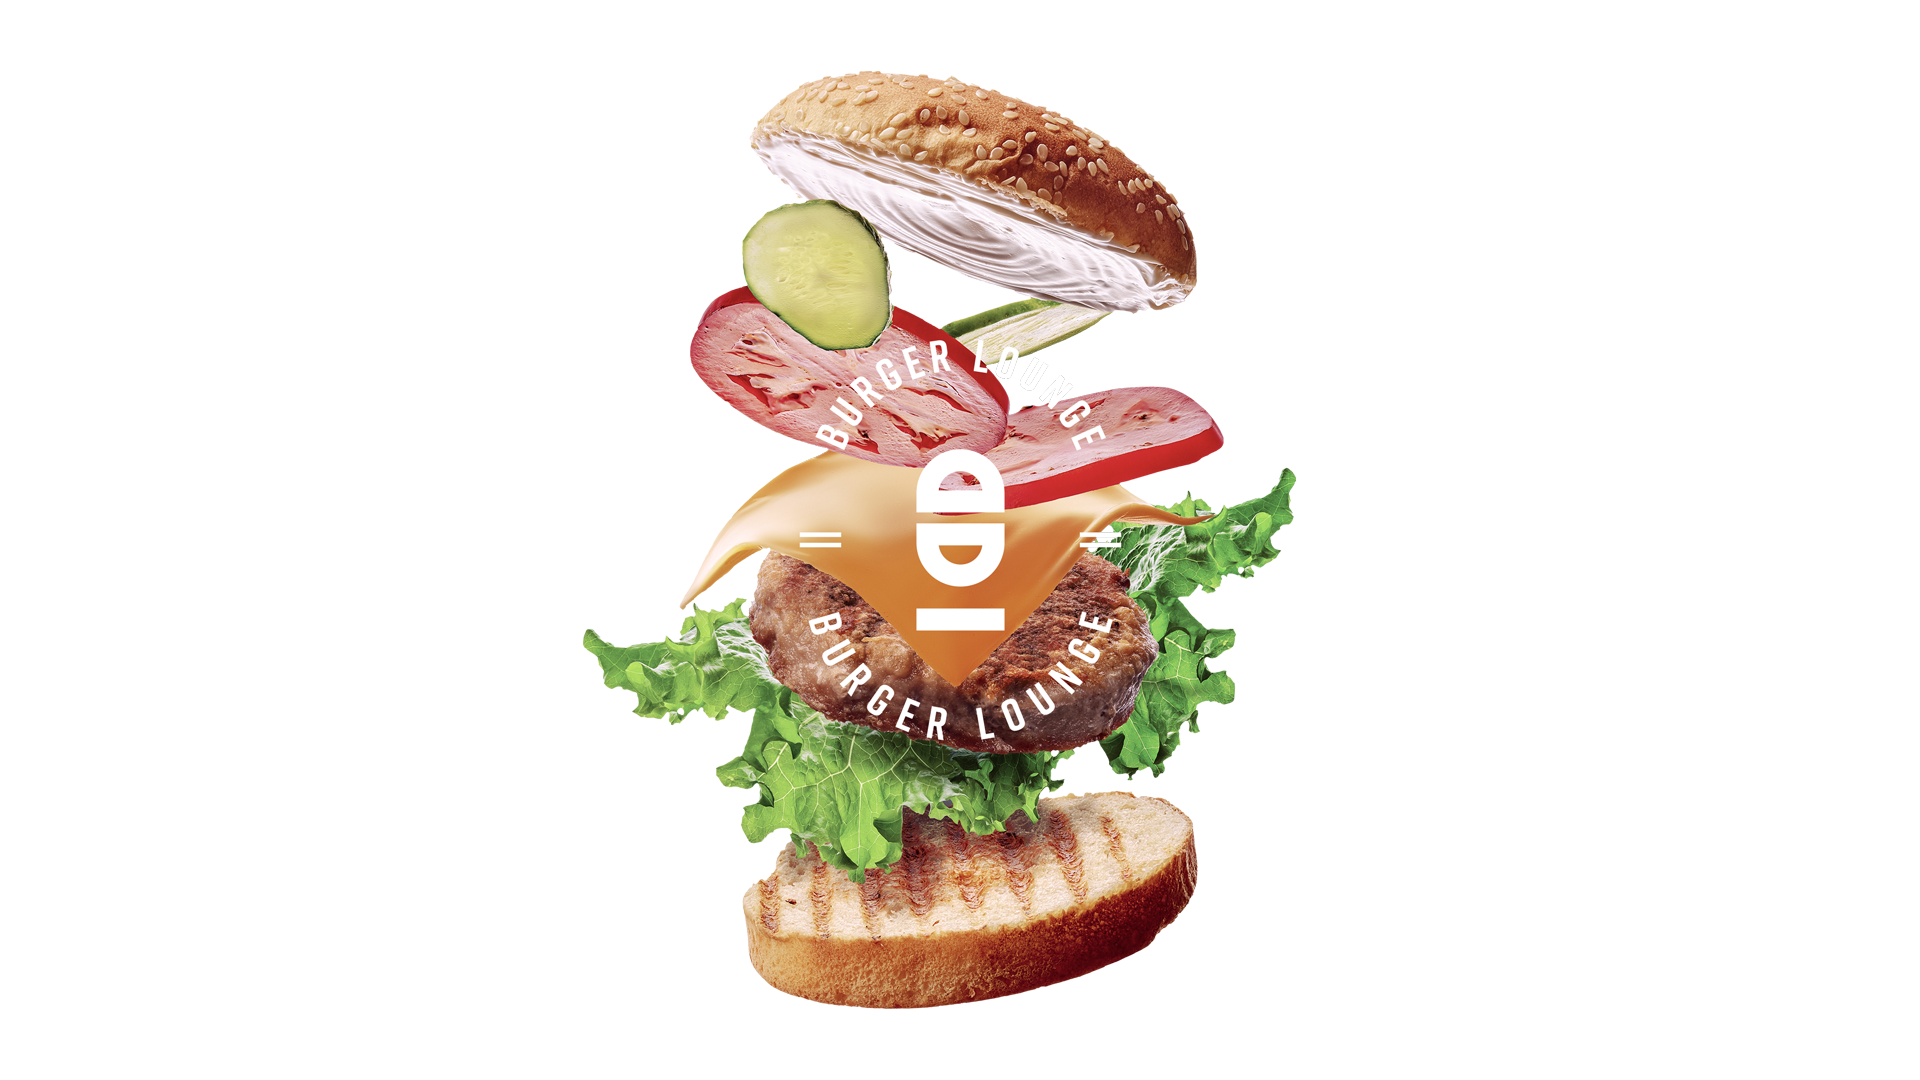 Burger-Lounge-Brand-Facelift-By-Millimeter-Creative-Agency-M03